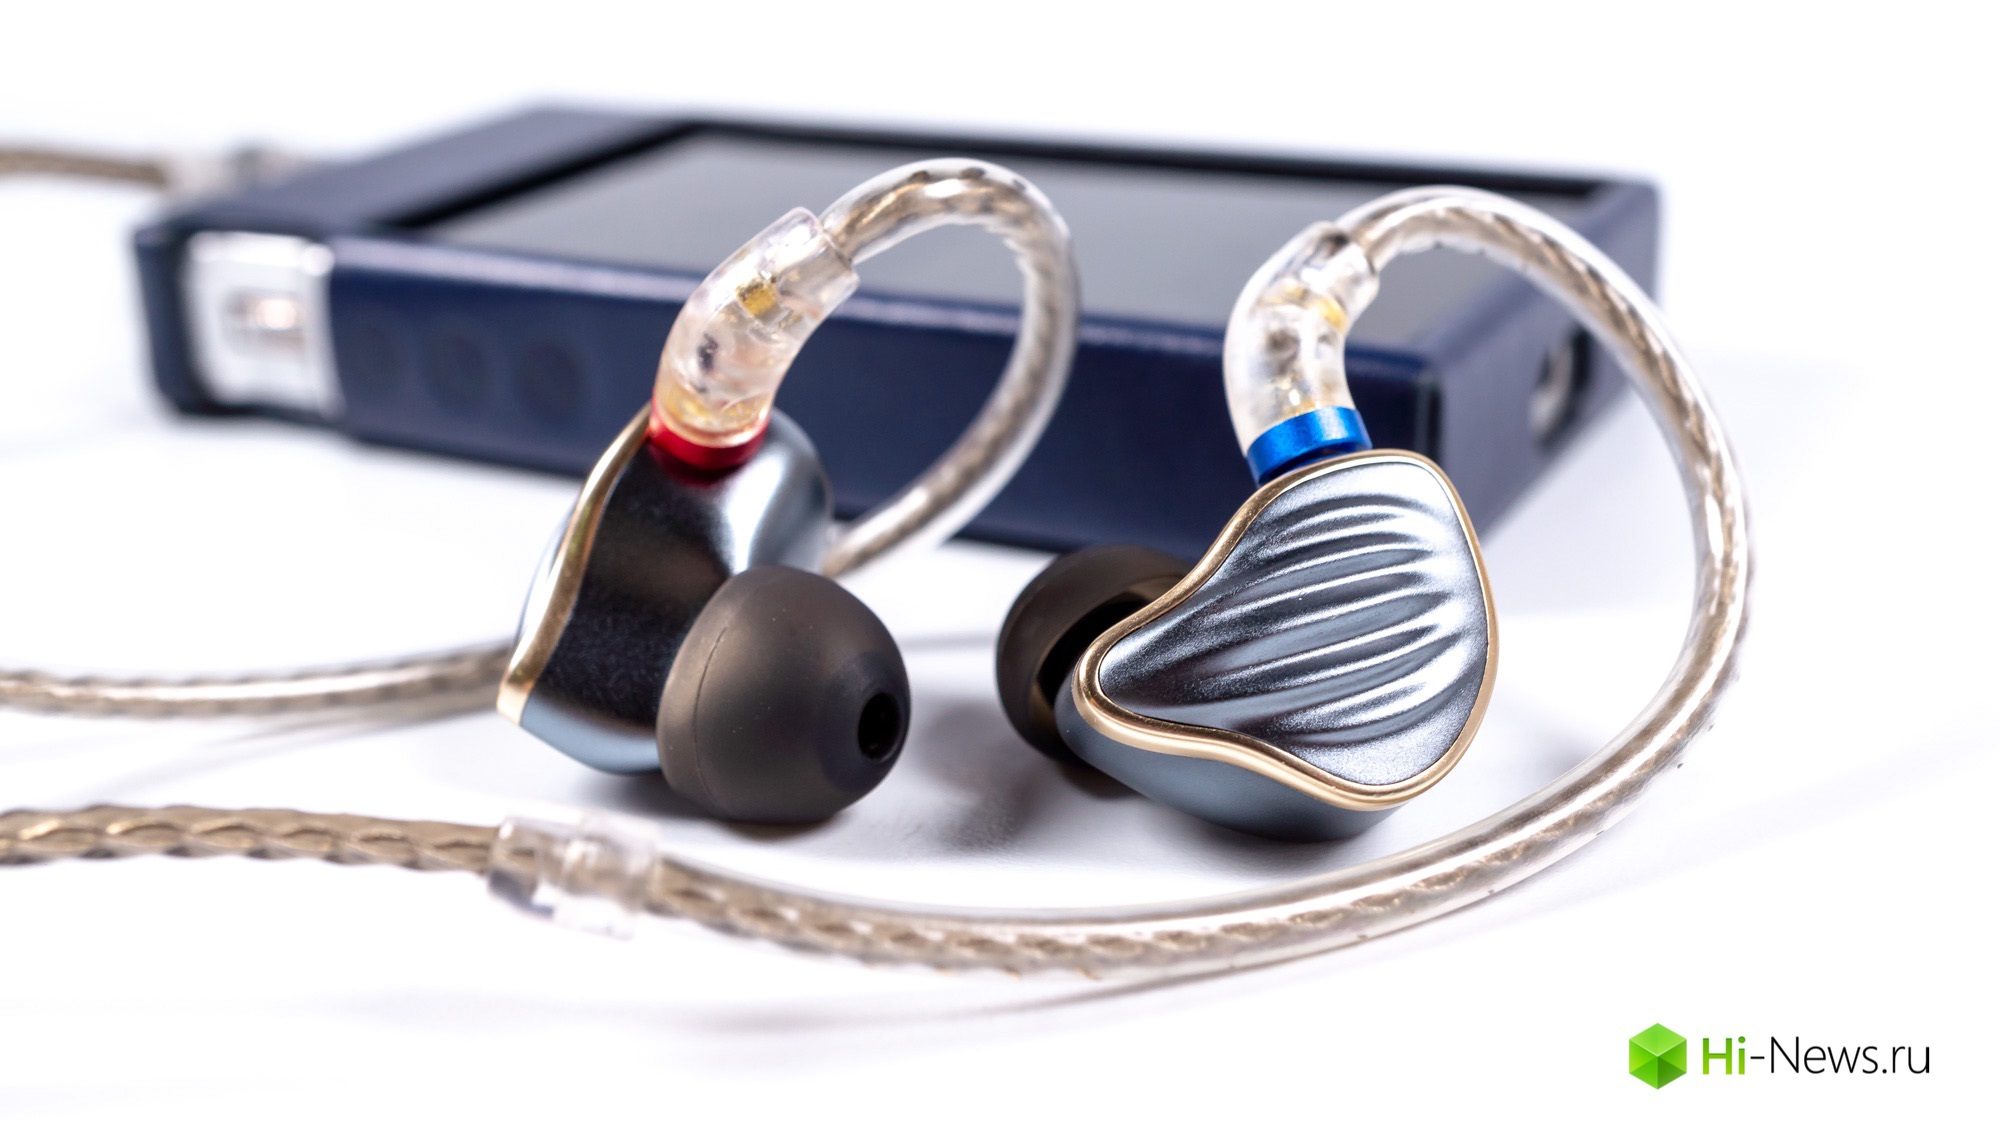 Overview headphones FiiO FH5 — technology, style and sound